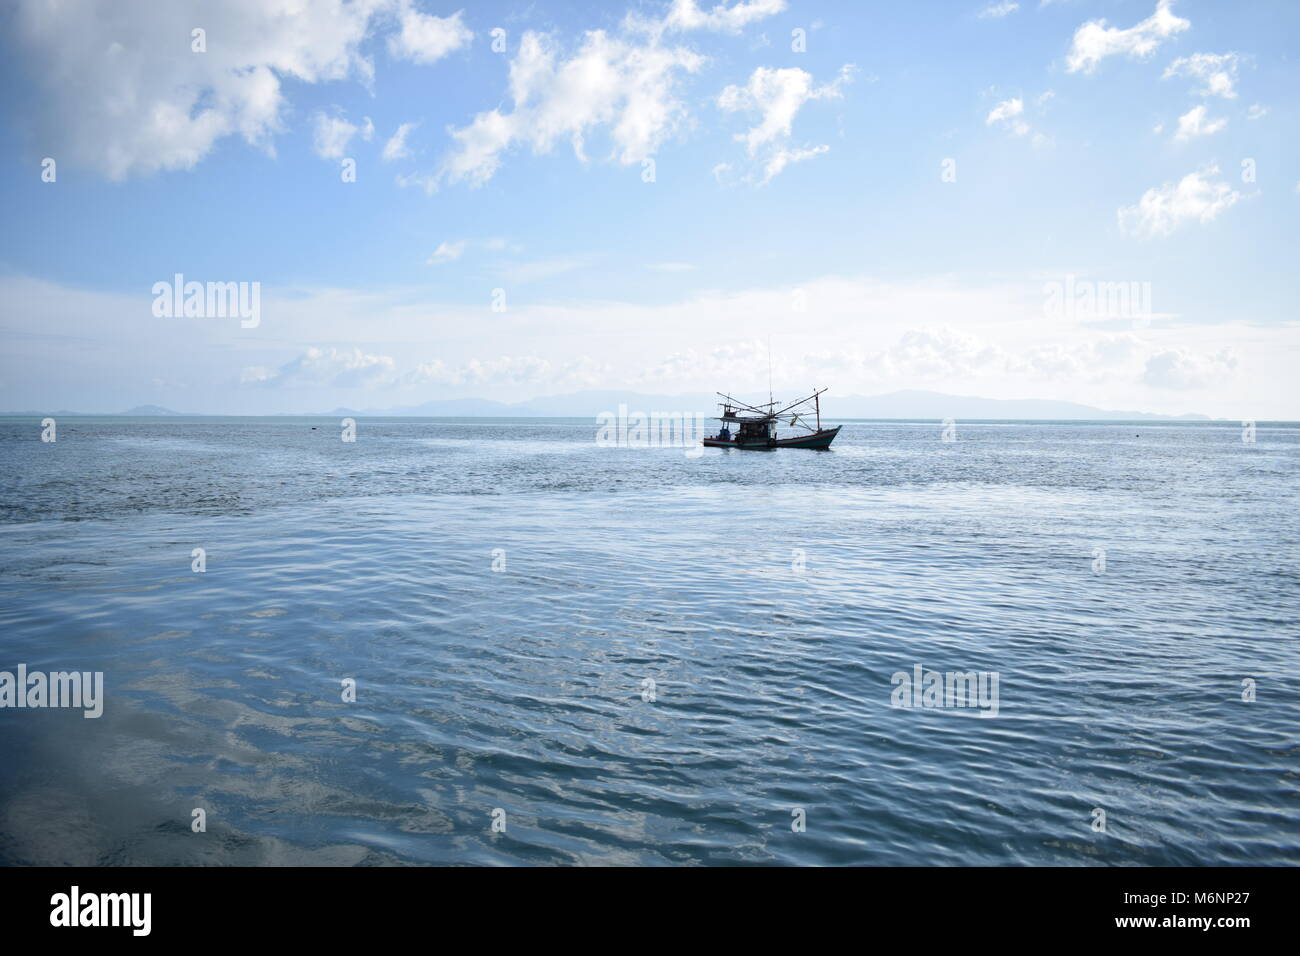 Small fisherman boat in the middle of the gulf of thailand alone with a blue sky and mountains in the background. Stock Photo